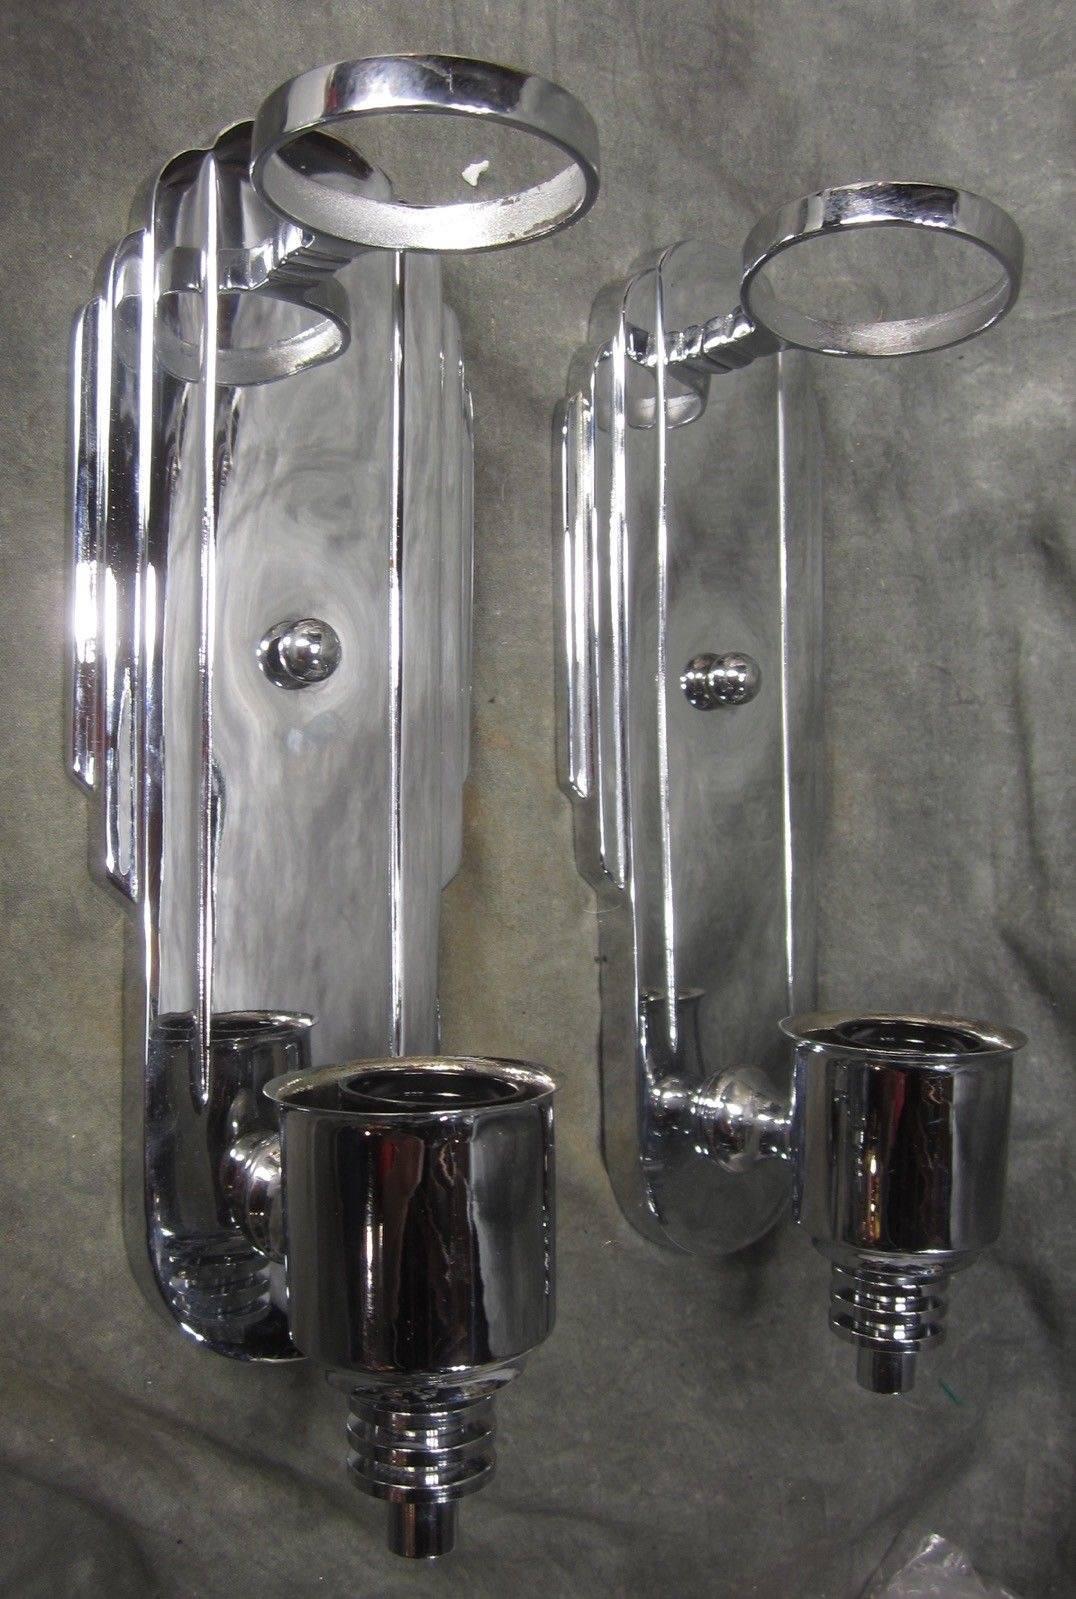 Streamline stunning pair of skyscraper art deco sconces from 1930s. A high quality original design in polished chrome Beautiful stepped backplates with original faceted cylindrical white milk glass. Amazing design with attention to all details.